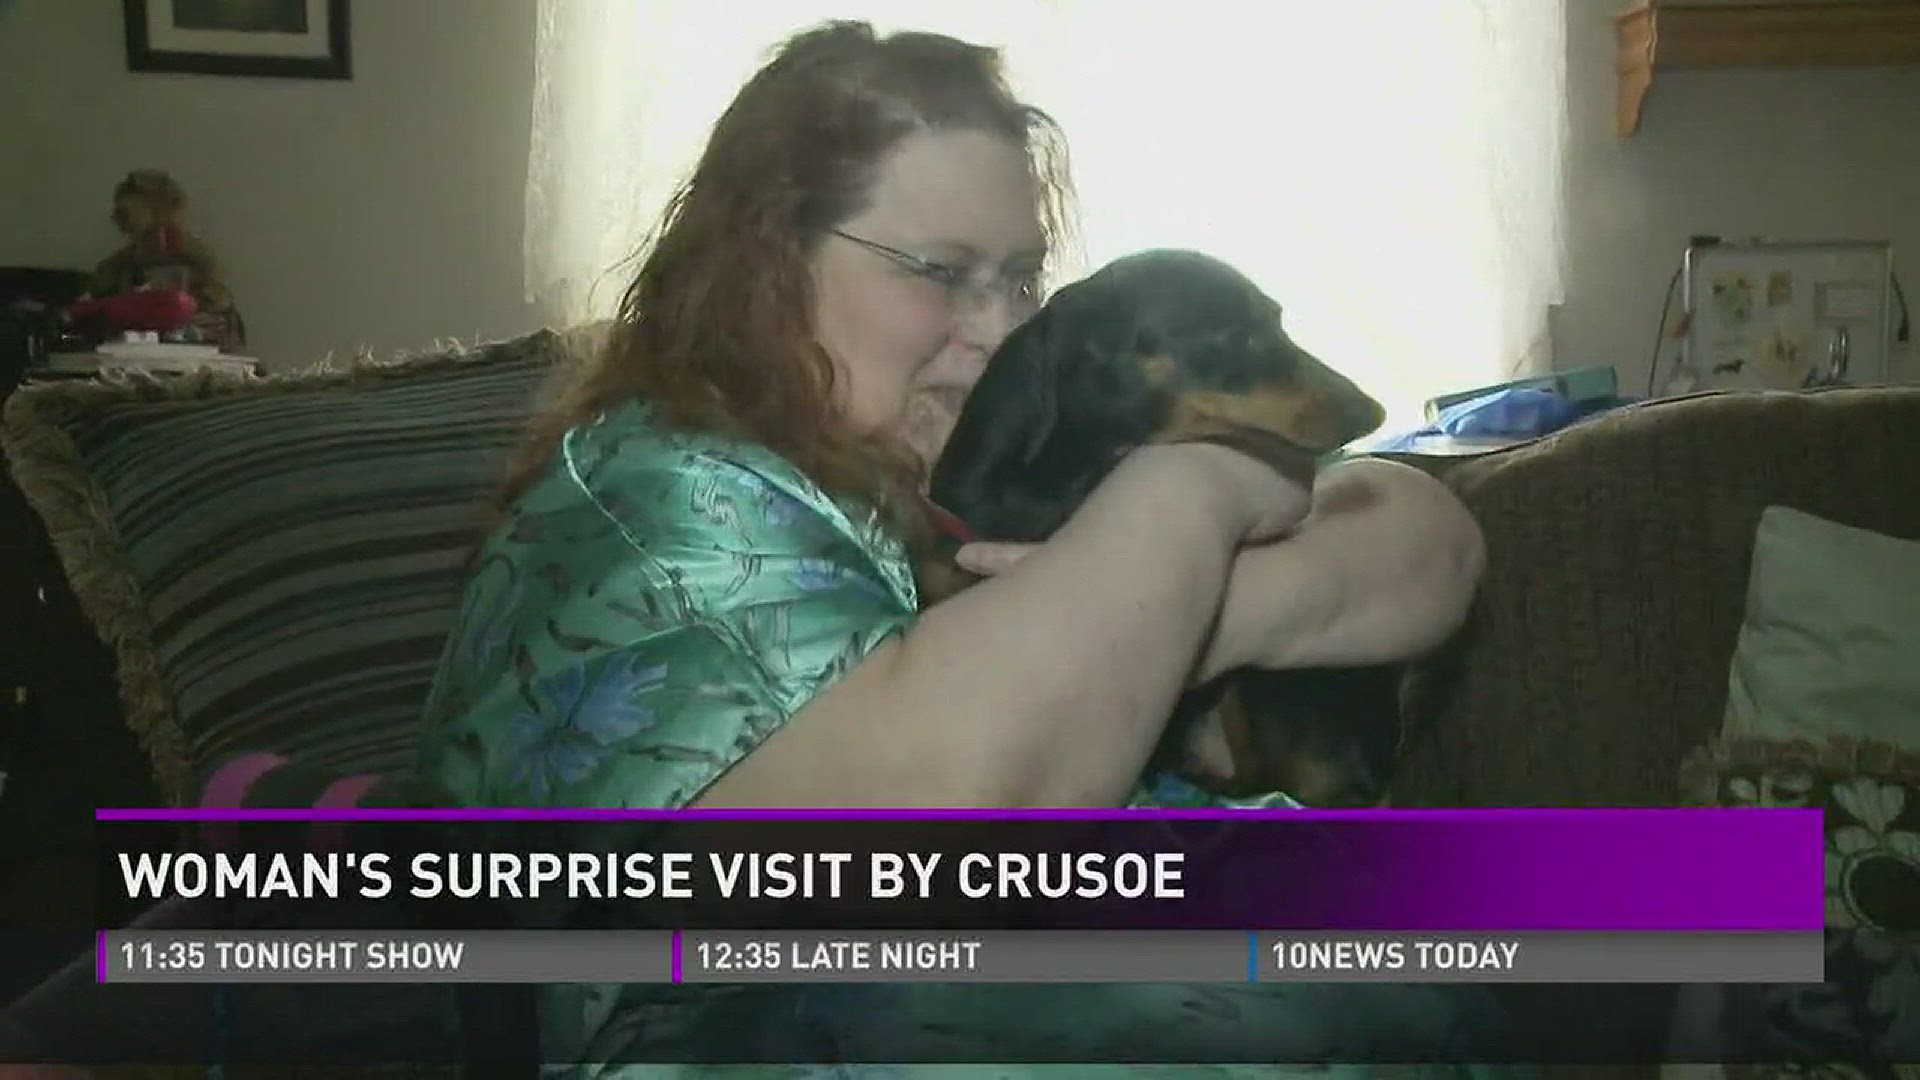 The famous dachshund, Crusoe, and his owner made a surprise arrival at one of his biggest fan's house.